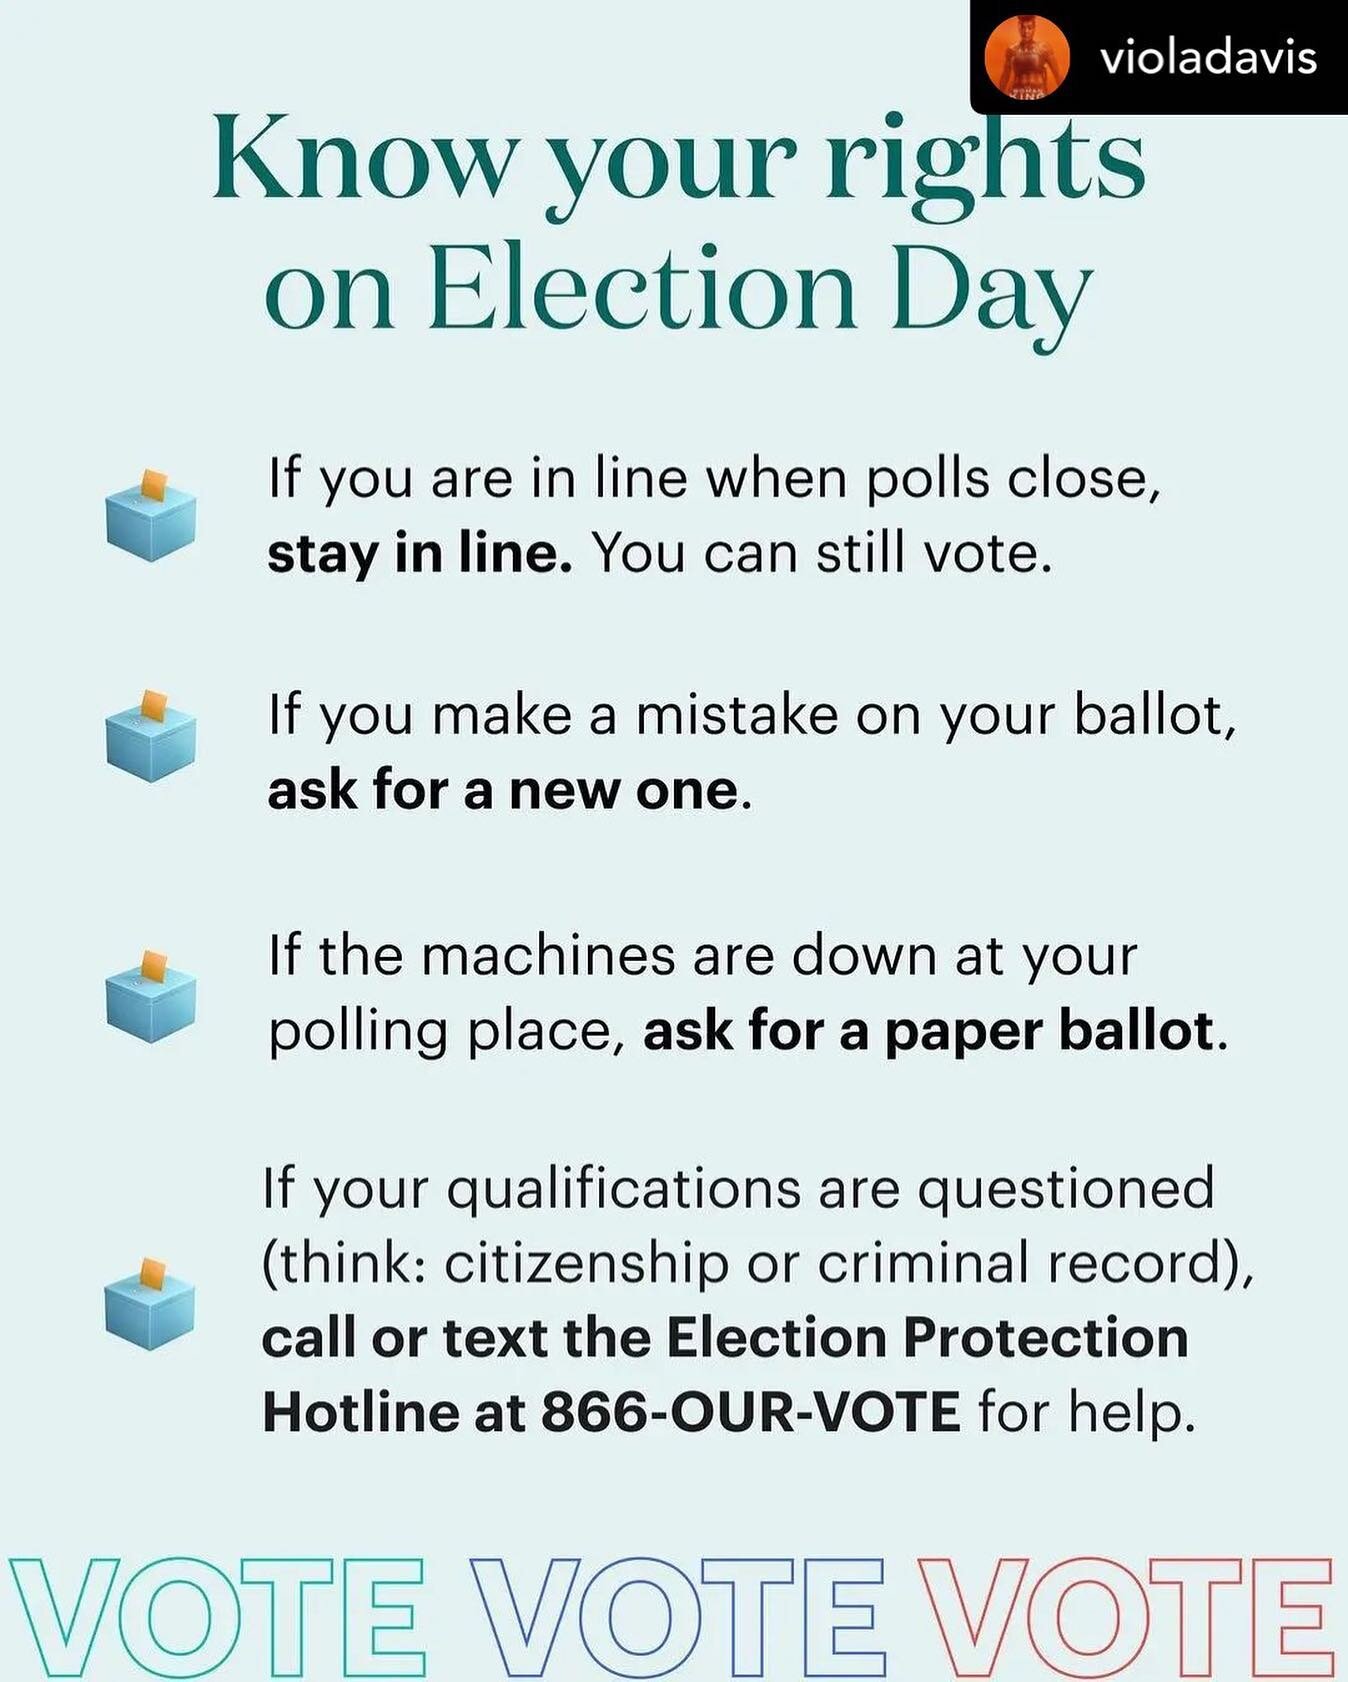 .
Repost&bull; @violadavis Send this to everyone you know who&rsquo;s voting on #ElectionDay. It&rsquo;s important to know your rights in the voting booth &mdash; because casting your ballot should be as easy and convenient as possible.

But in recen